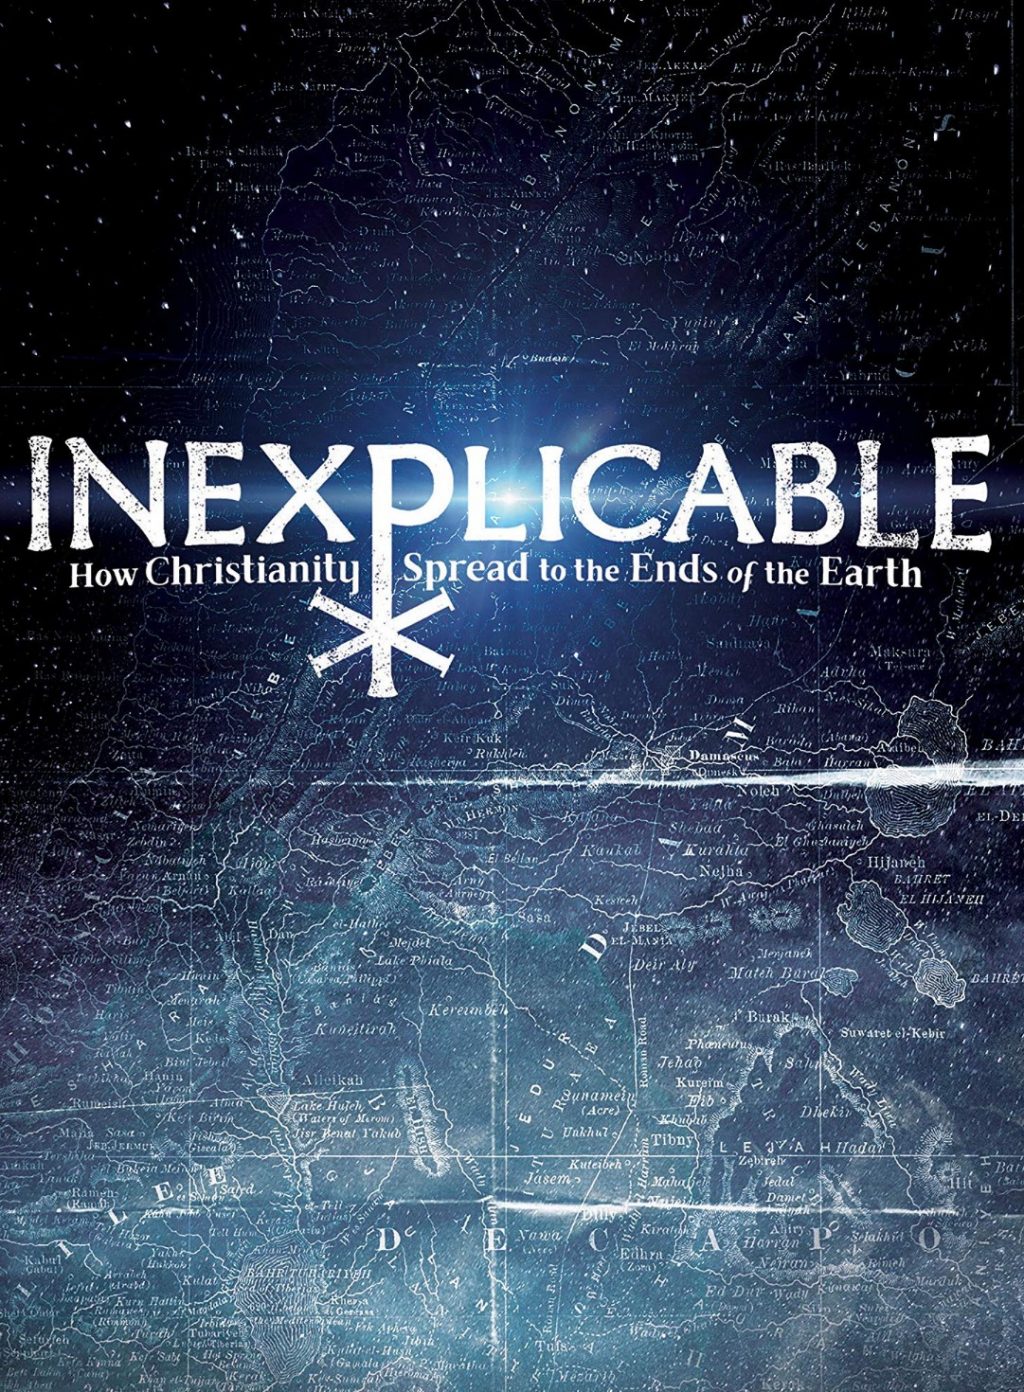 Download / Review / Watch Inexplicable-TBN-State-Of-Faith-Dr. Pattengale